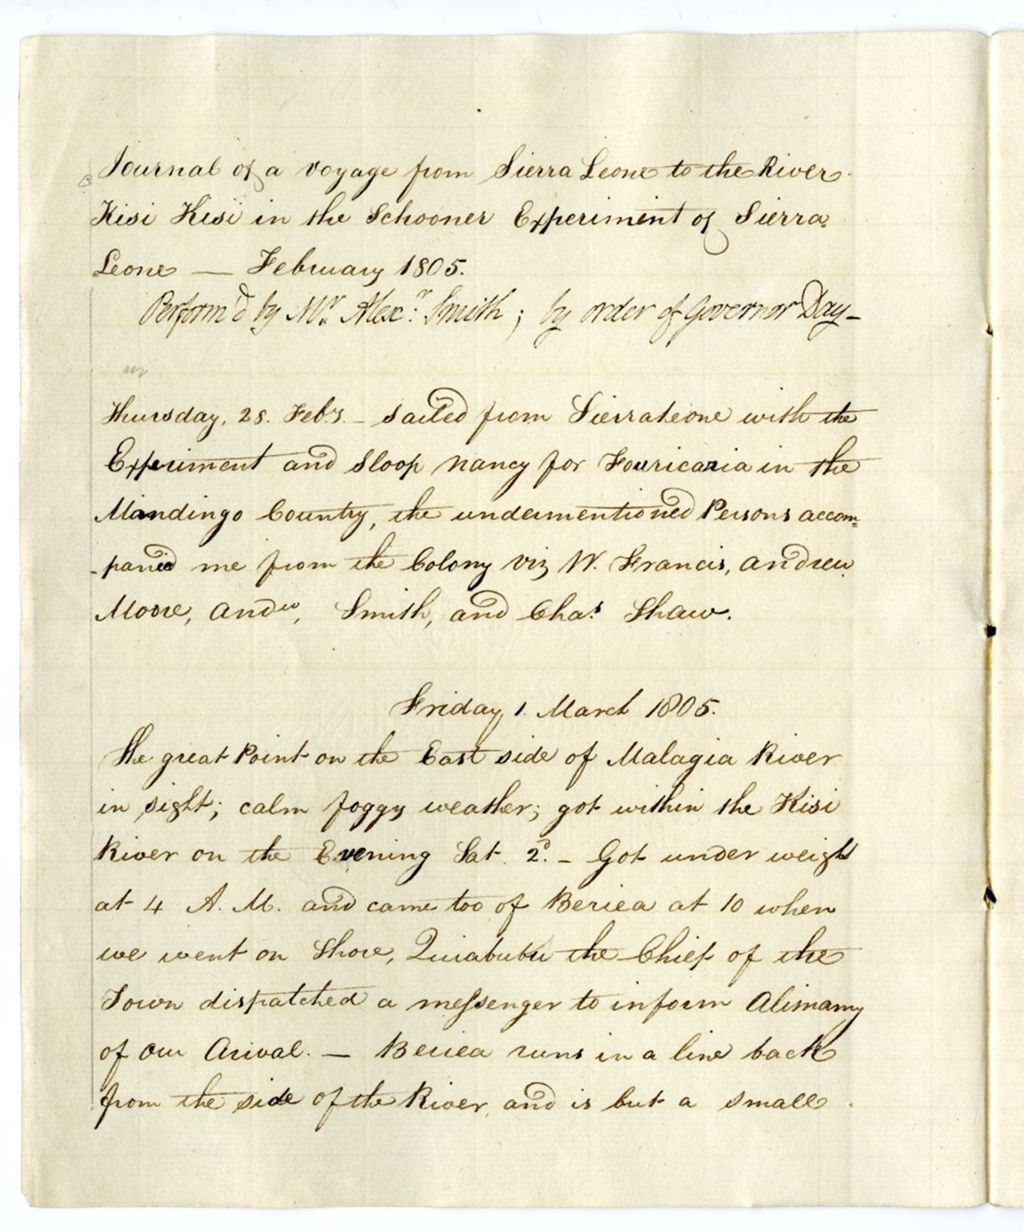 Extract from the journal of a voyage from Sierra Leone to the River Kisi Kisi, 1805